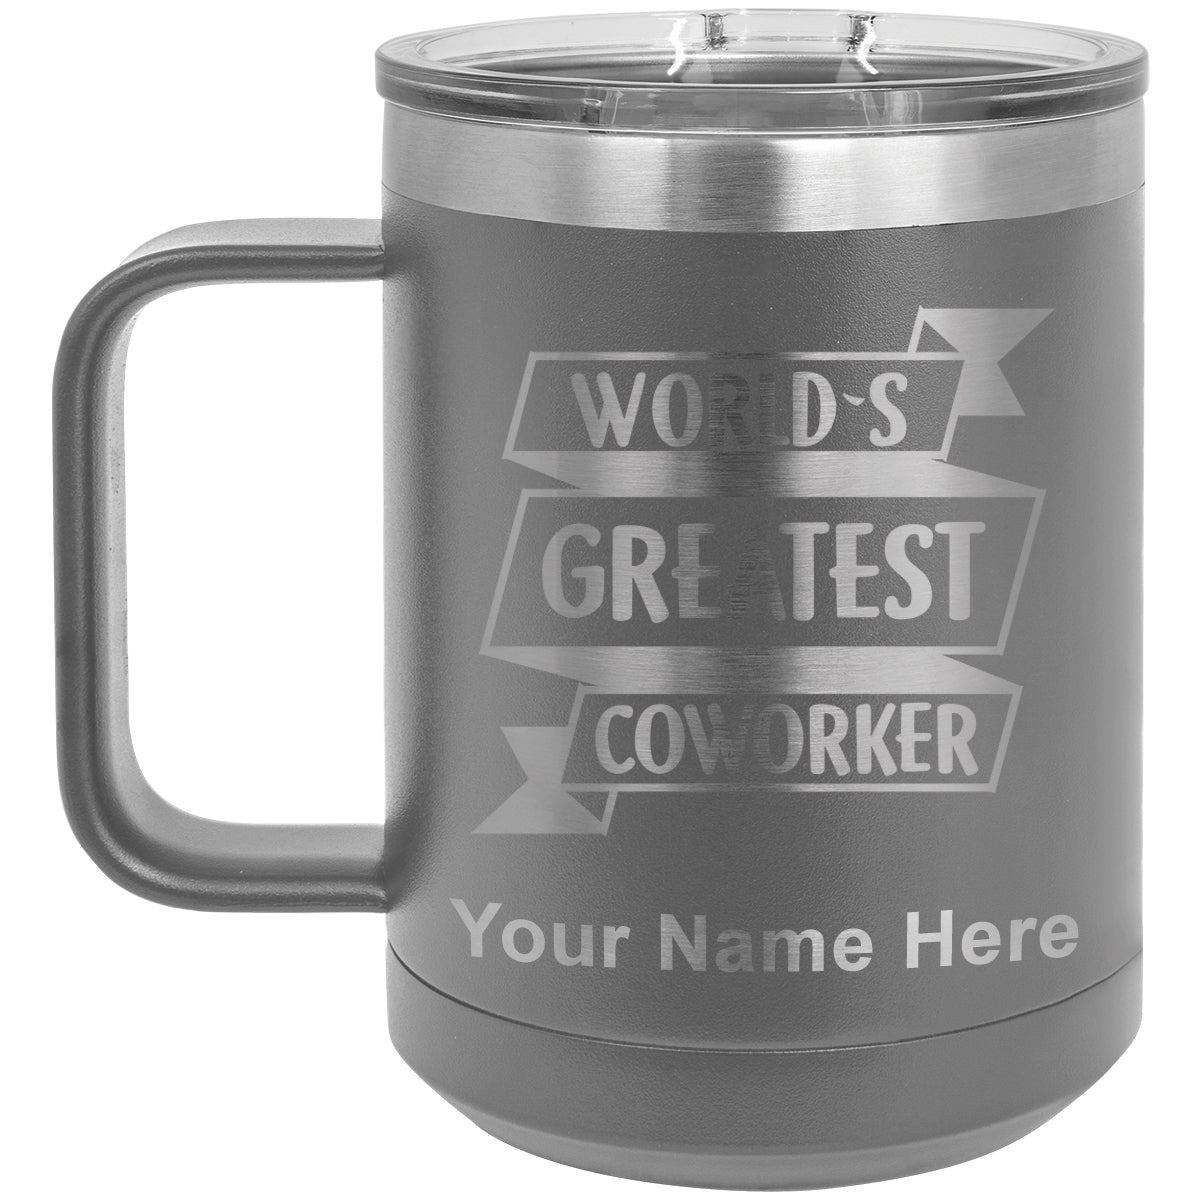 15oz Vacuum Insulated Coffee Mug, World's Greatest Coworker, Personalized Engraving Included